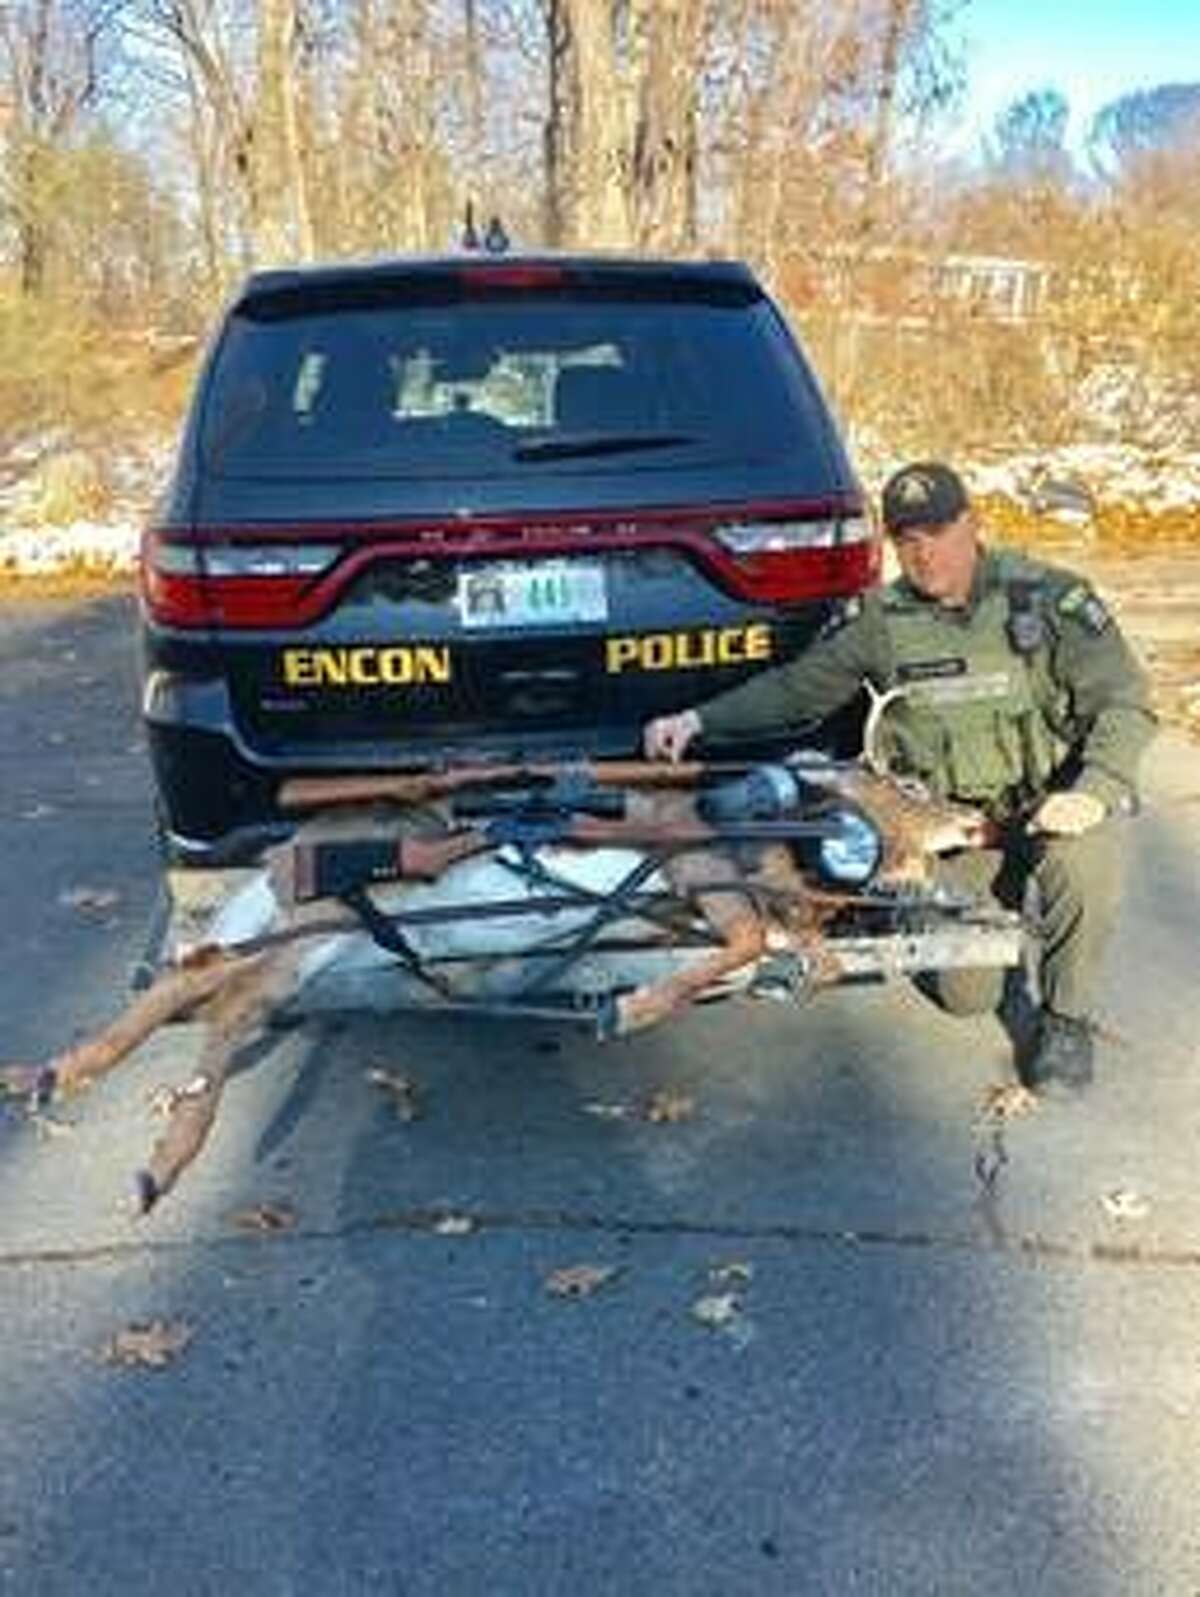 A state Department of Environmental Conservation officer poses with evidence seized during an investigation in to illegal hunting in Berne.